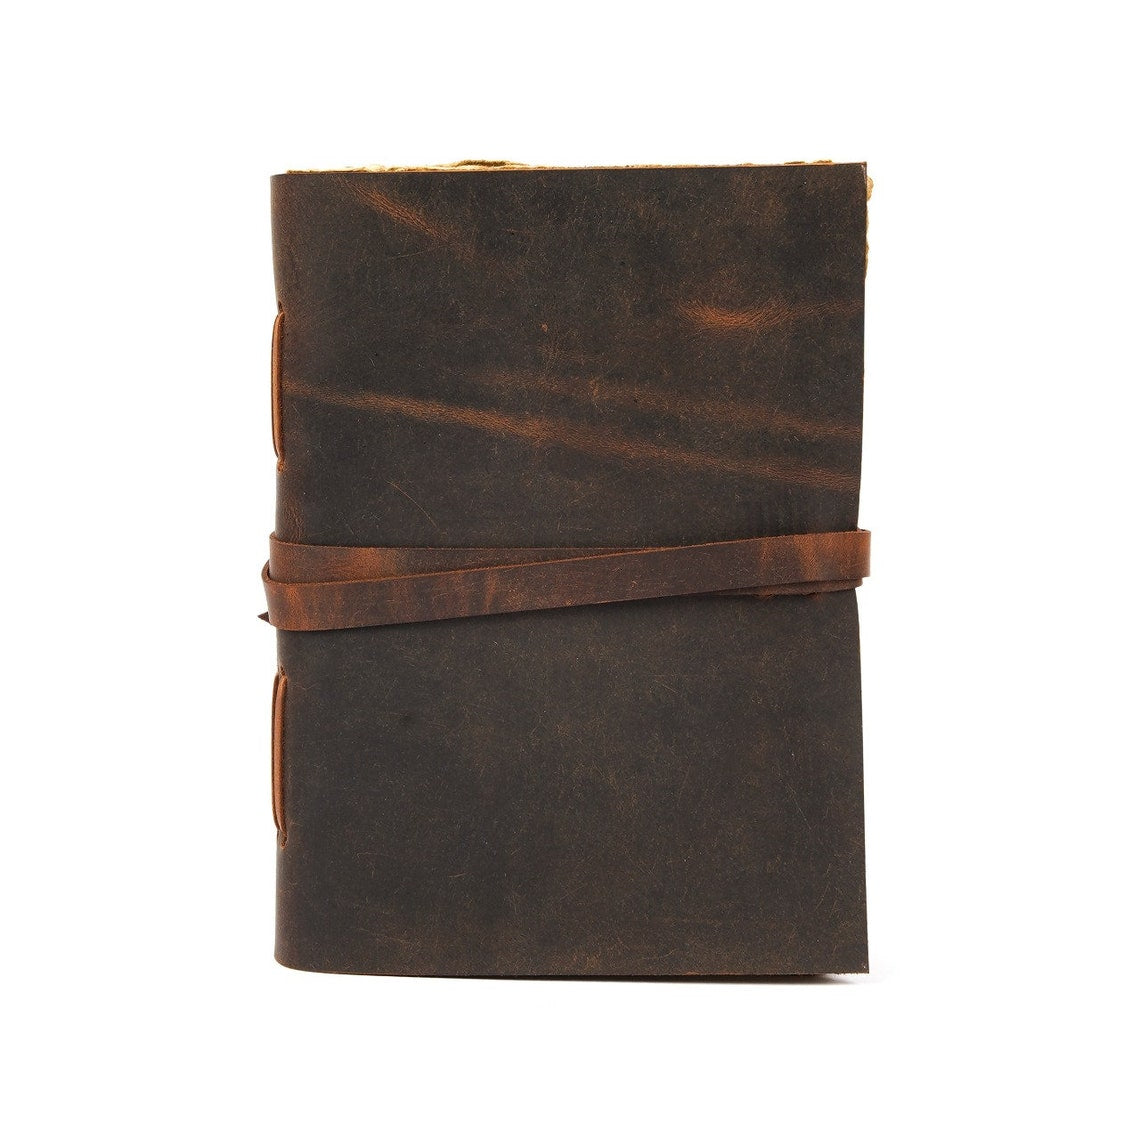 Melbourne Leather Co Vintage Leather Journal Recycled Paper Journal, For Notes, Notebook, Sketch book, Diary, Handmade Book,100% Recycled Rag,Tree Free Paper - LJ02